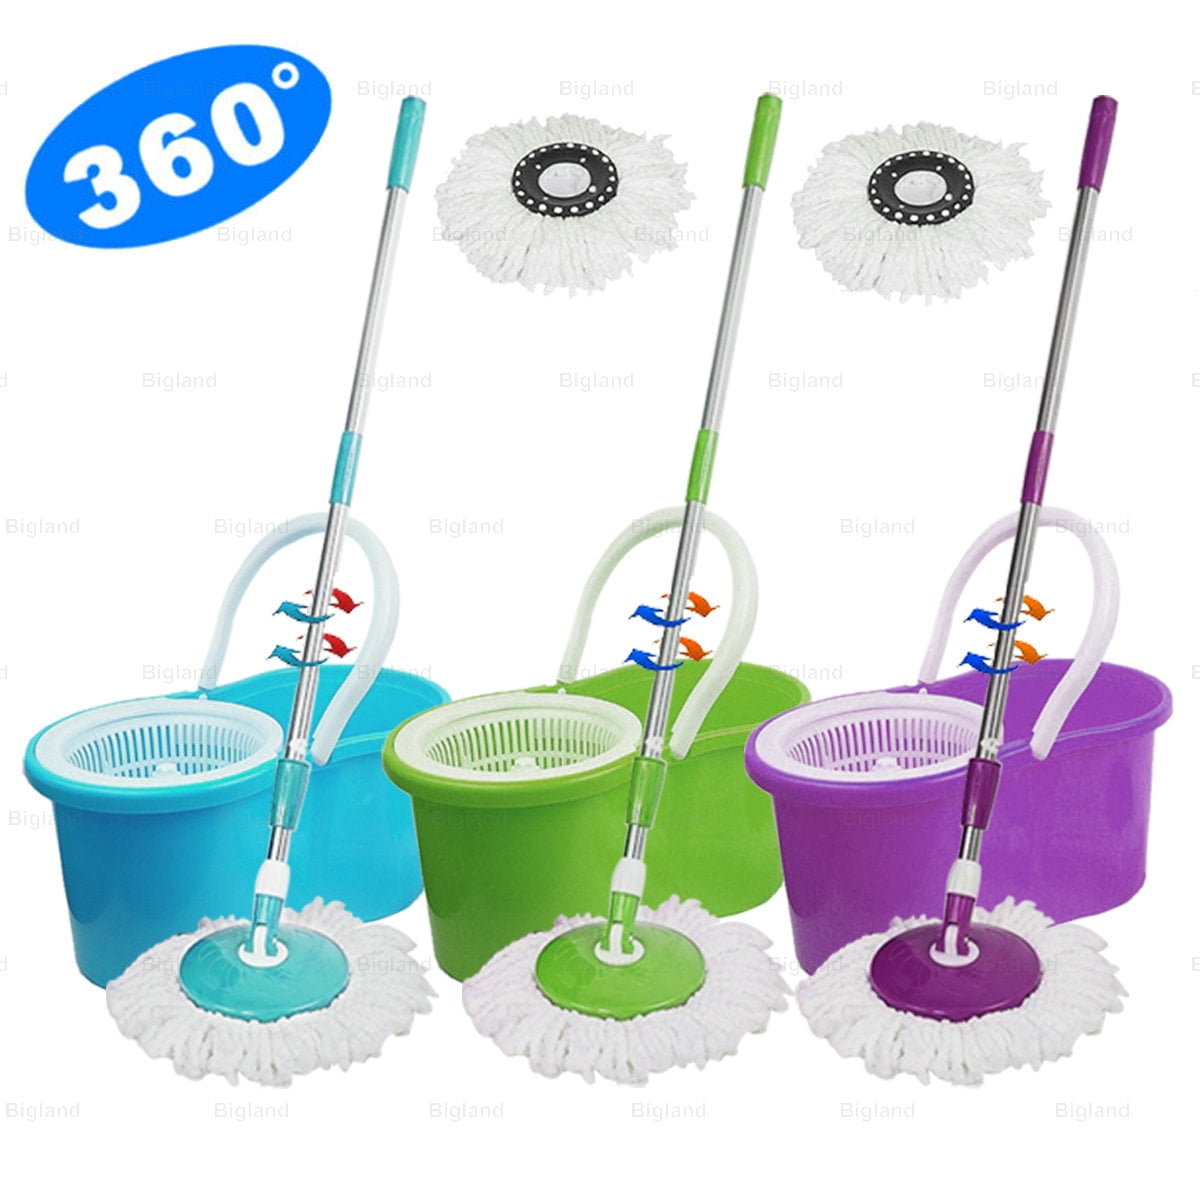 Microfiber Spin Mop Easy Floor Mop with Bucket and 8 Mop Heads 360 Rotating Head 